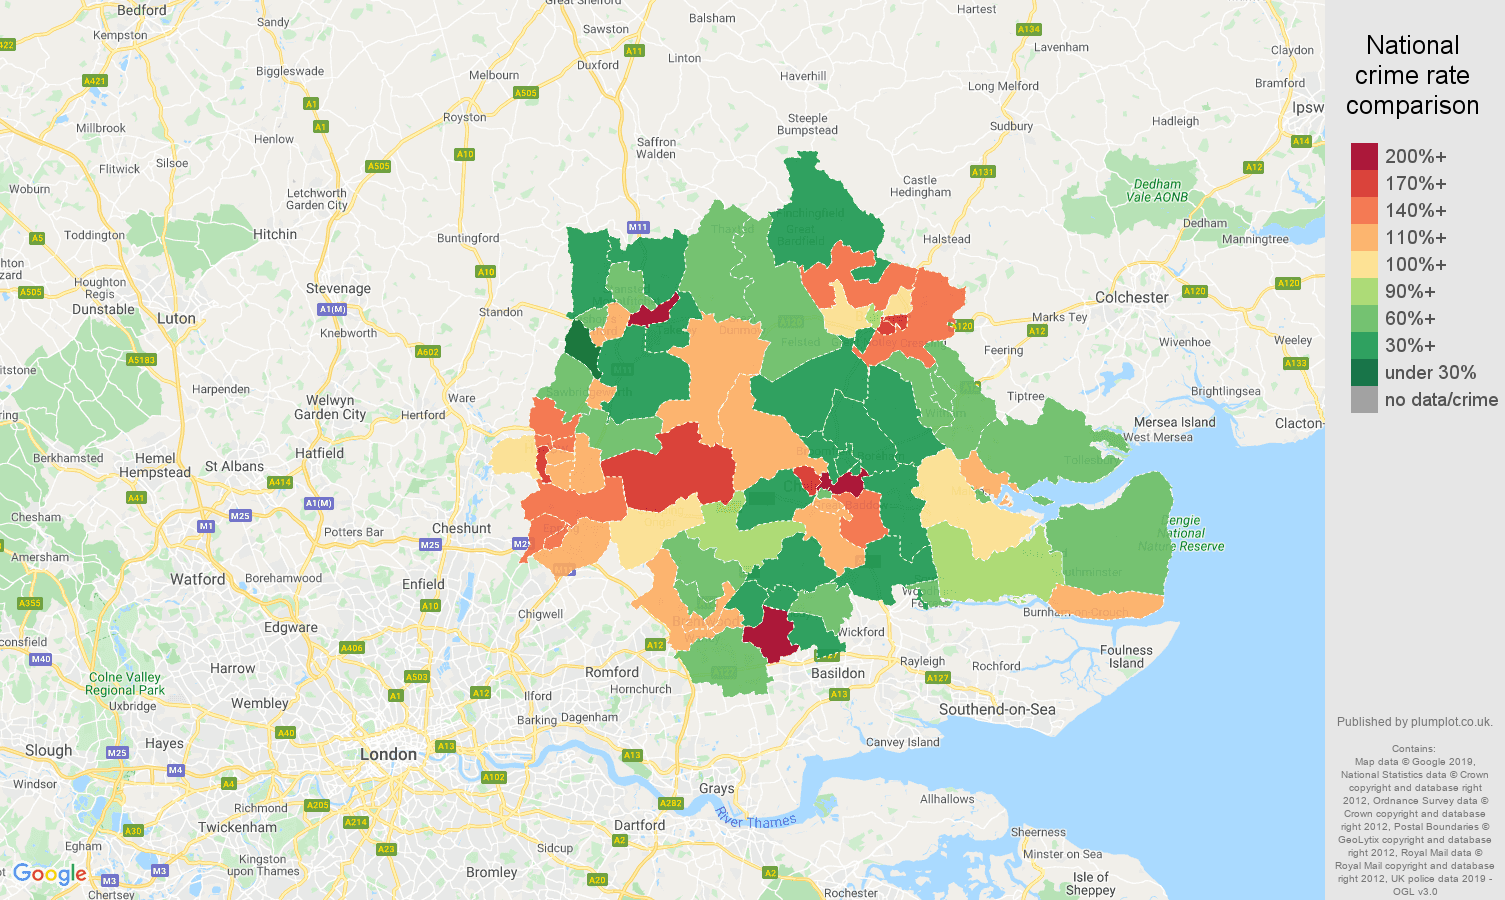 Chelmsford other crime rate comparison map